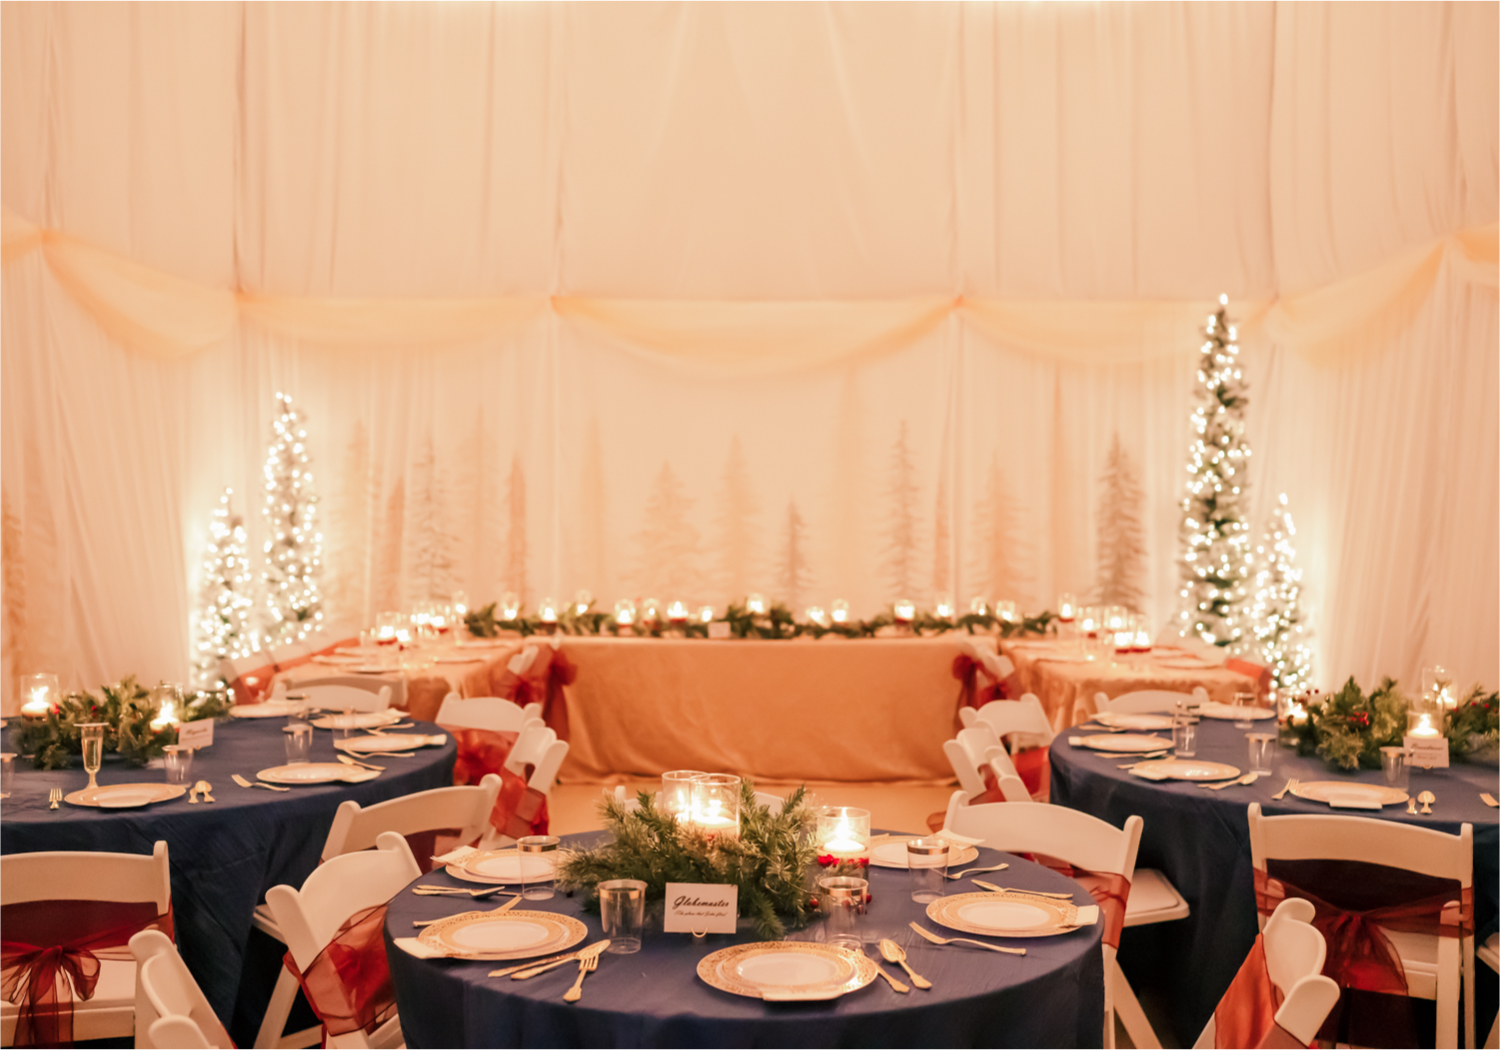 Winter Wonderland Wedding in Colorado Springs | Britni Girard Photography Colorado Wedding Photography and Film Team | Snow covered mountains and Christmas just a few days away | Annika + John's Nostalgic Winter Wedding | Bride's Dress iDream Bridal Essence of Australia | Air Force Academy | Reception with hand-painted mountain backdrops, candelight and Christmas trees.  Burgundy, Navy and Gold